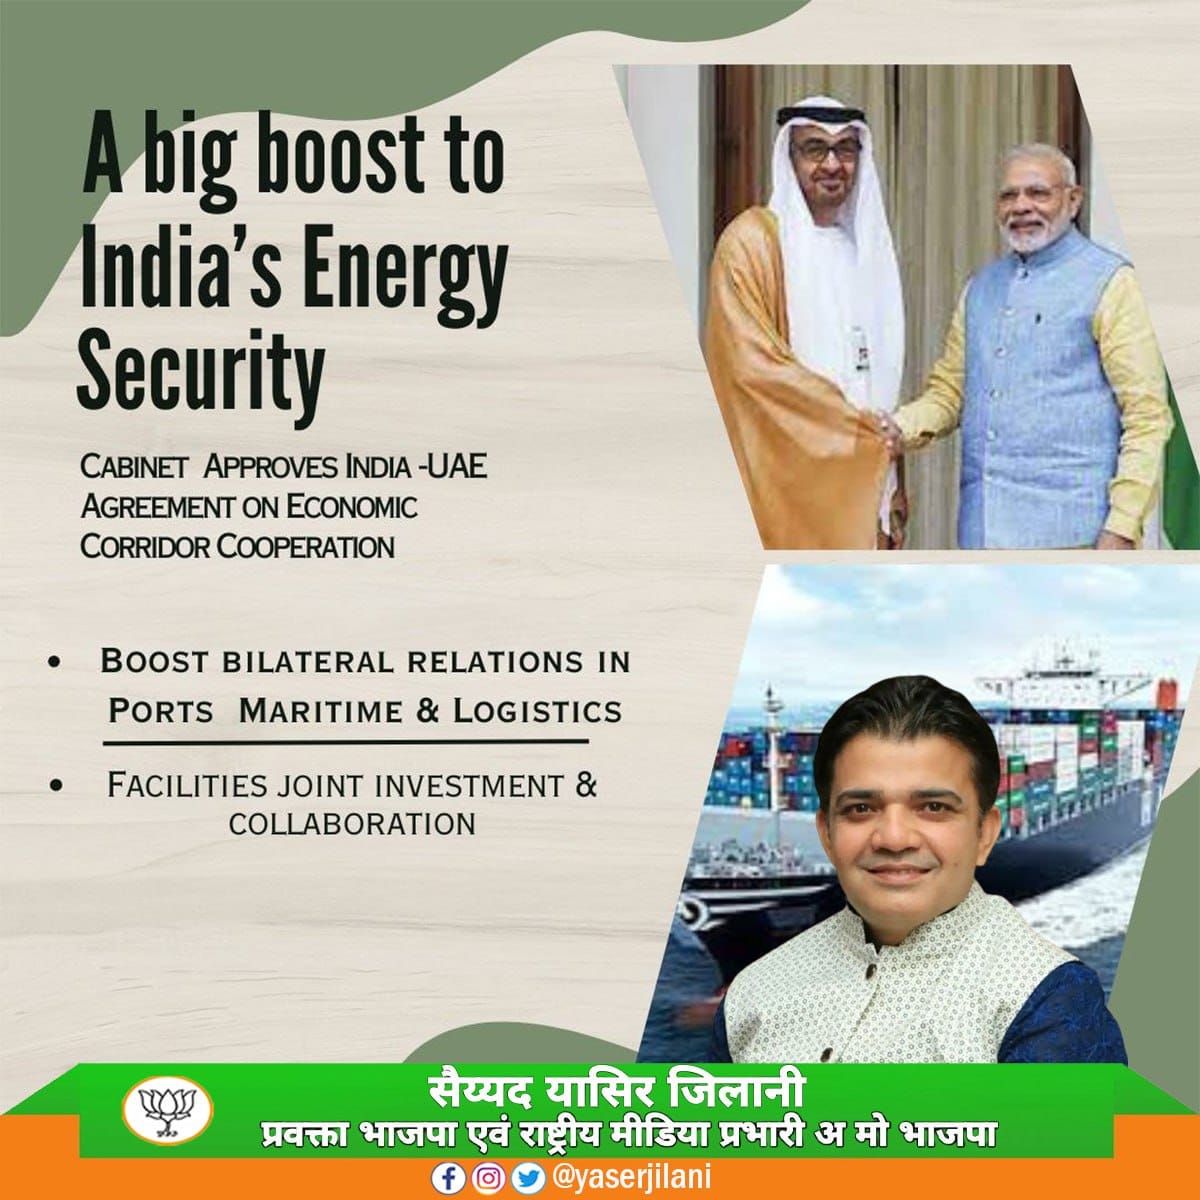 A green light for India's energy security as the Cabinet approves the India-UAE Economic Corridor Agreement. This deal strengthens ties in ports, shipping, and logistics, further opening doors for joint investments and a more secure energy future for India. 

#CabinetDecisions